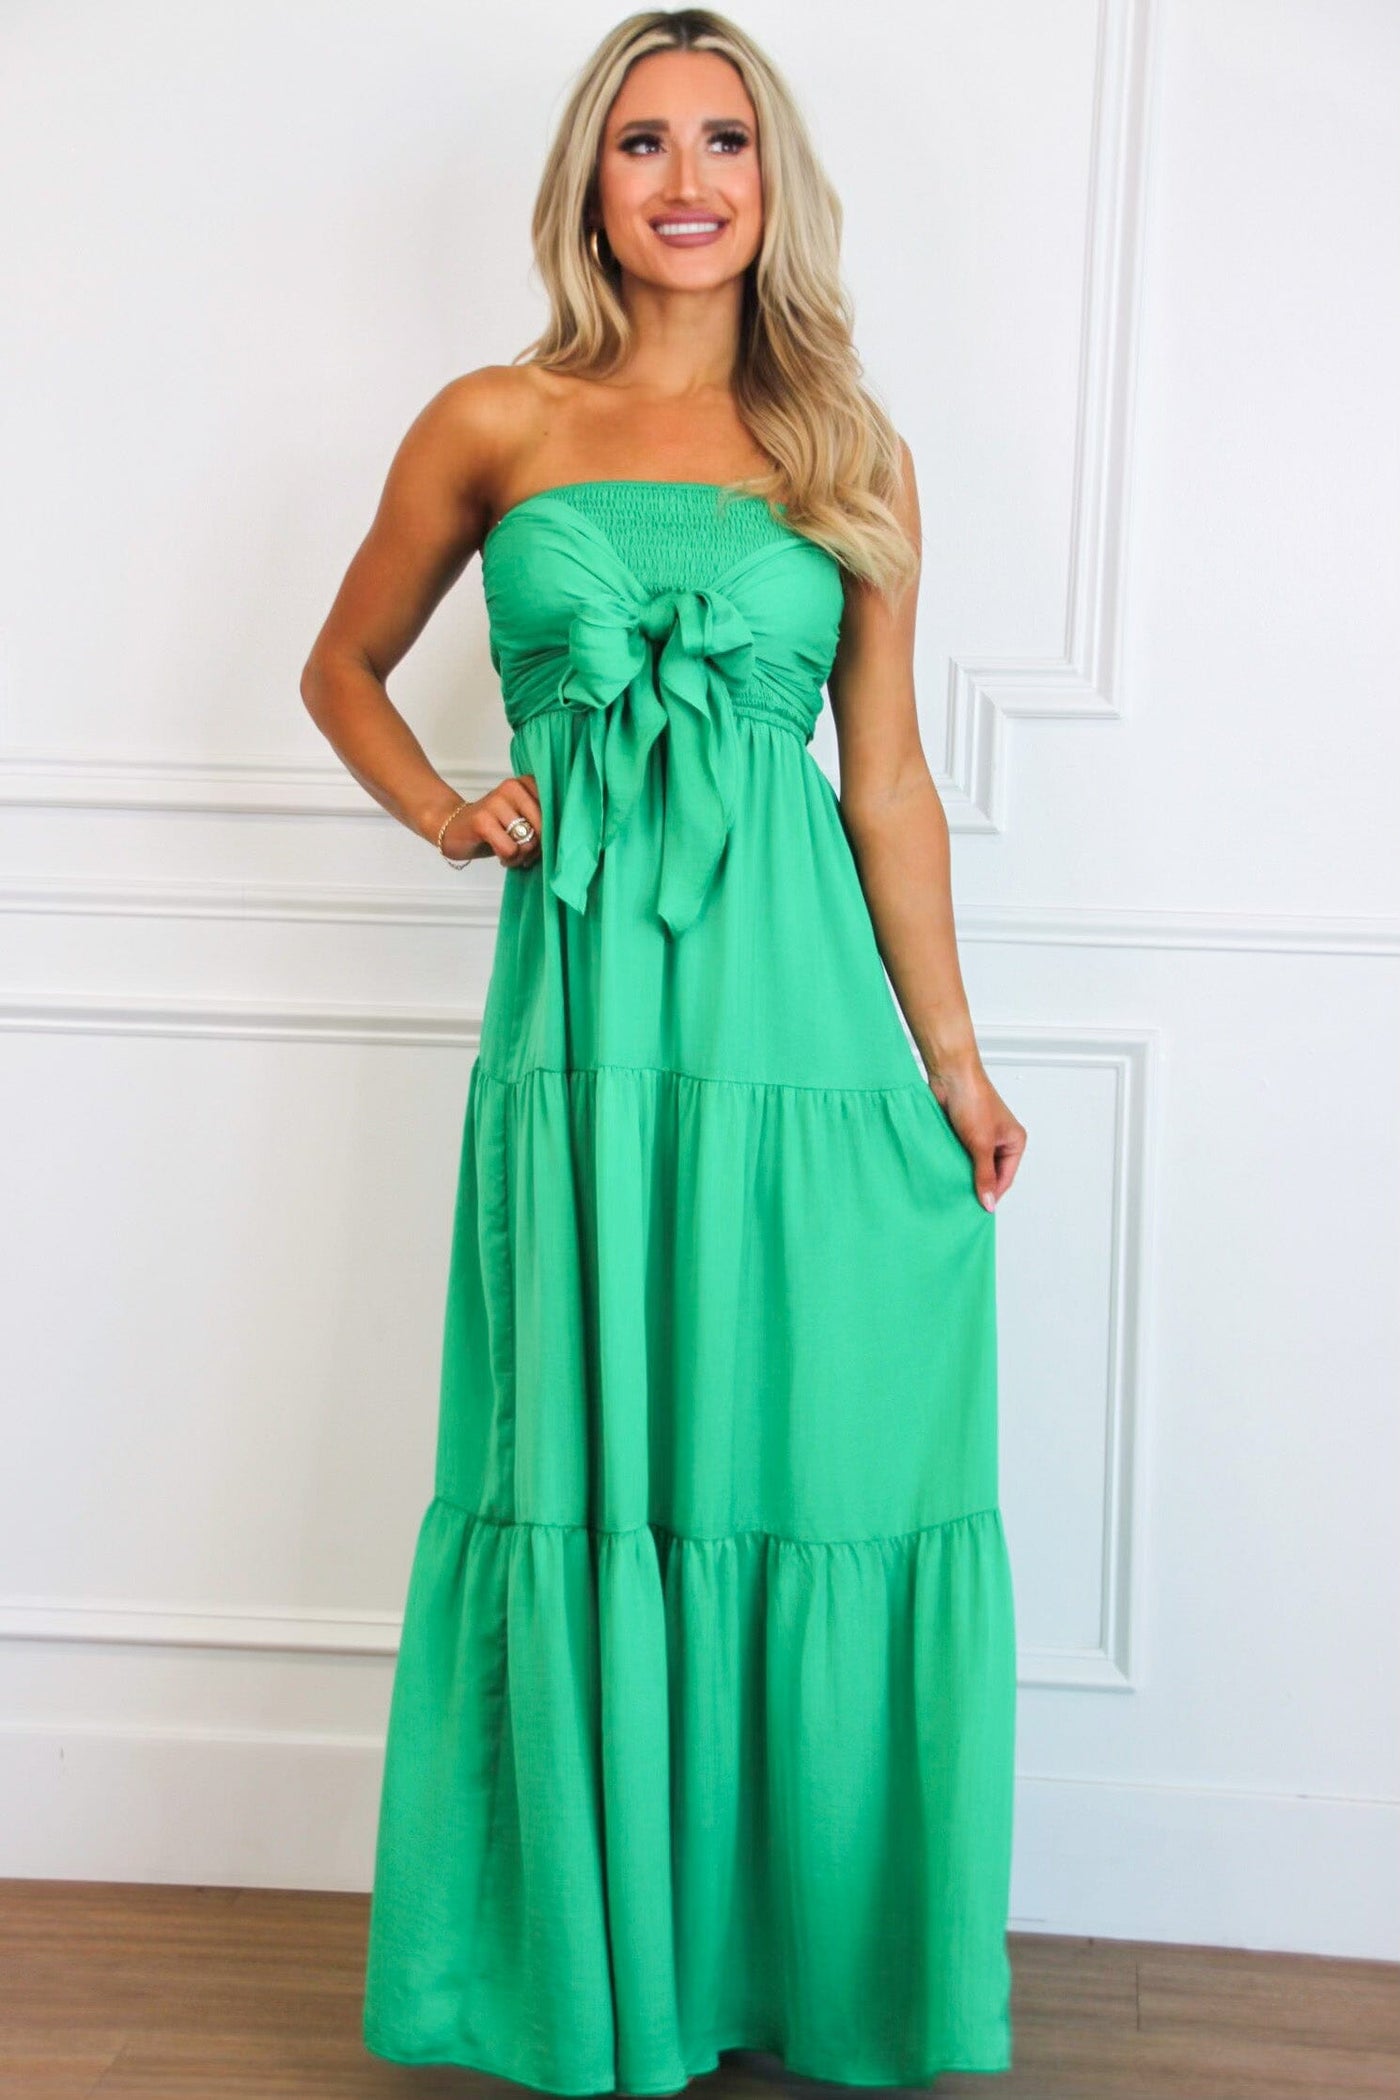 Santorini Sweetheart Smocked Maxi Dress: Green - Bella and Bloom Boutique